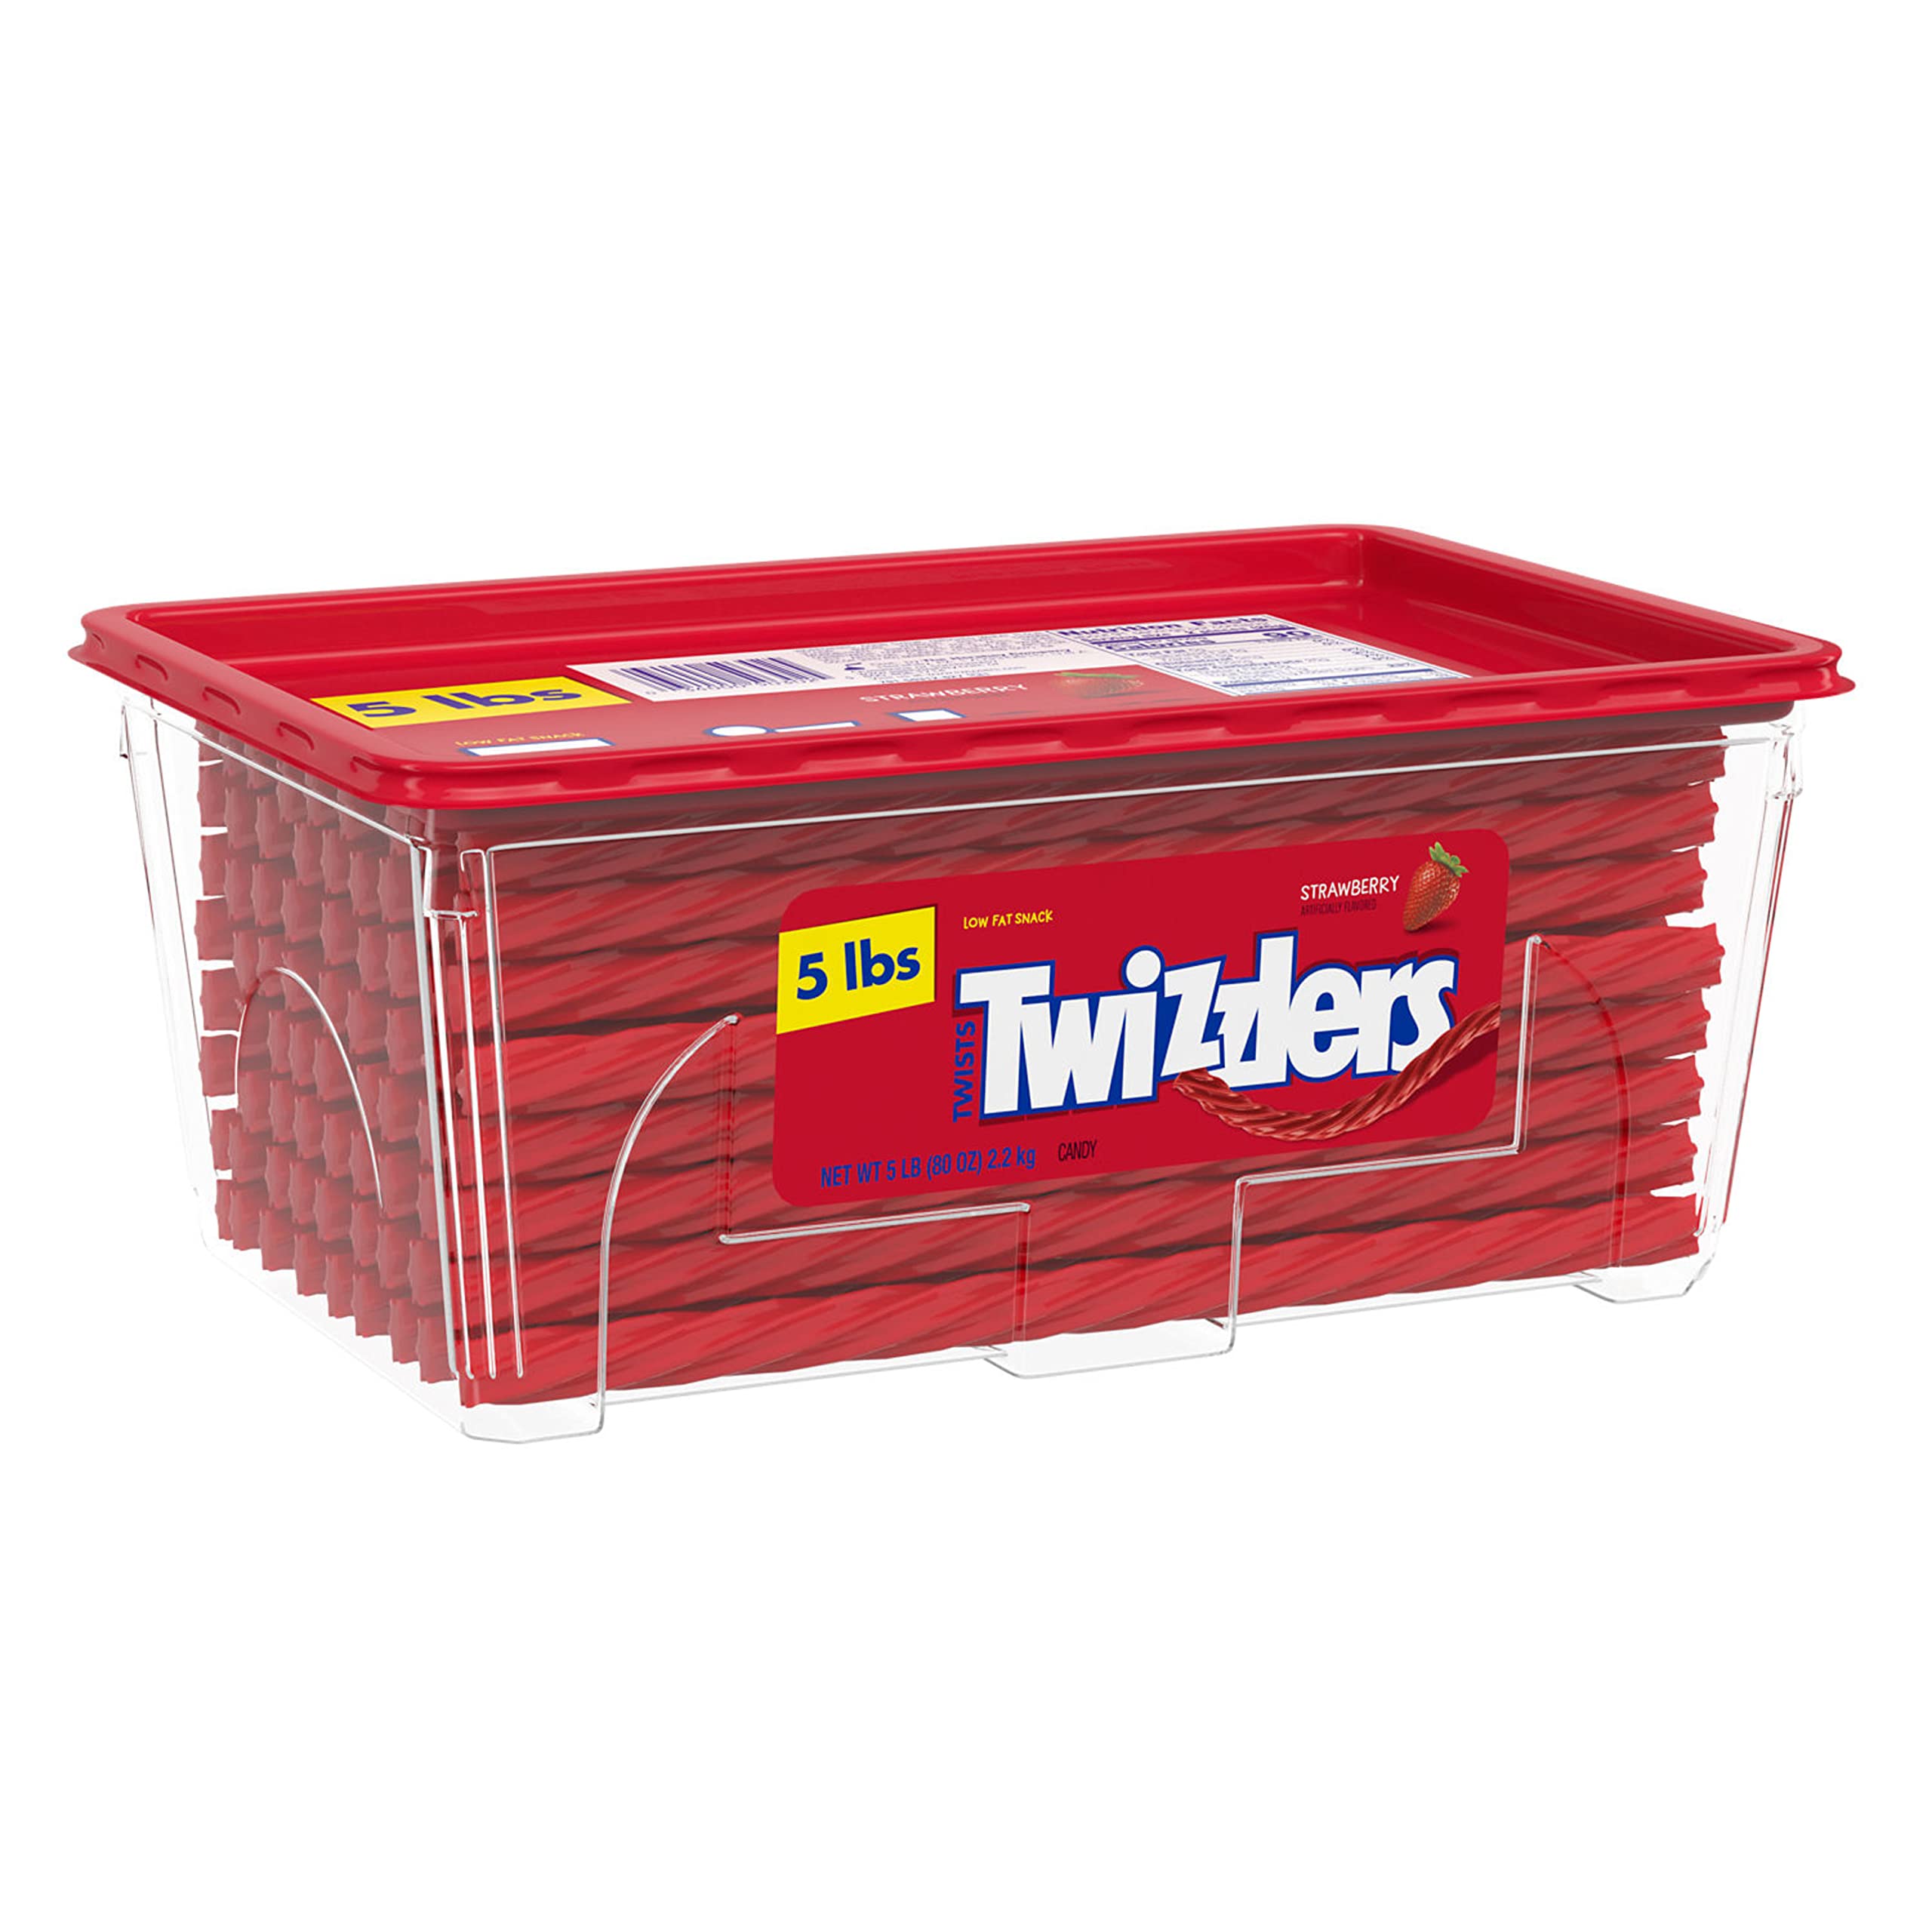 TWIZZLERS Twists Strawberry Flavored Licorice Style, Low Fat Candy Tub, 5 lb $7.23 after coupon Prime Exclusive Deal